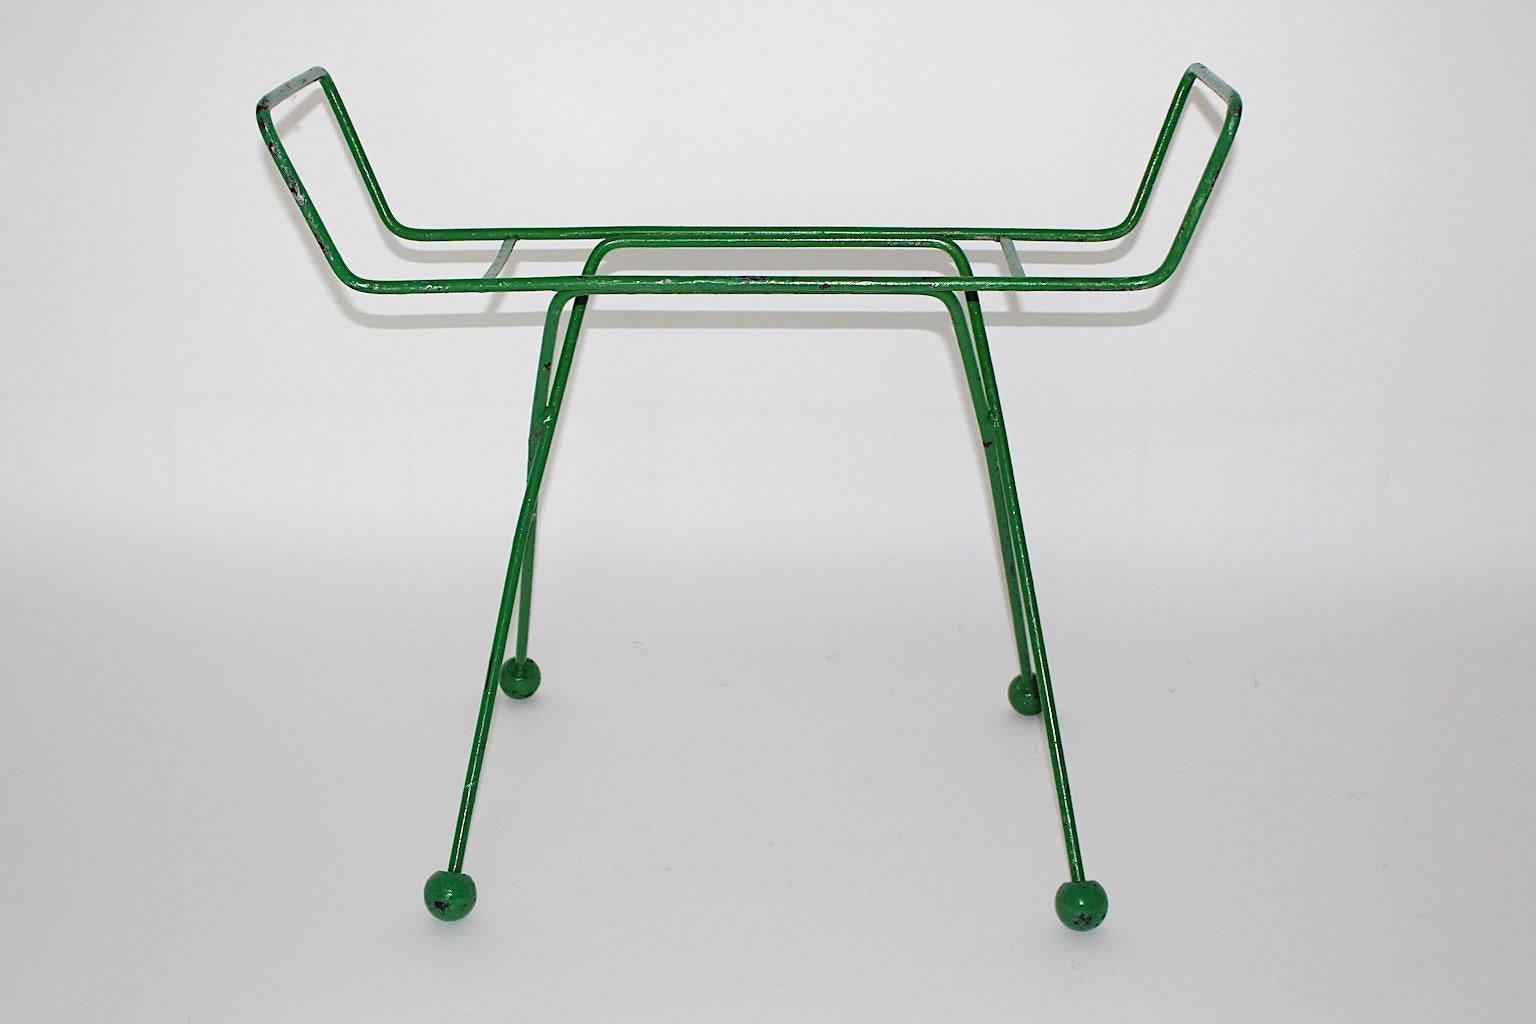 Mid Century Modern vintage luggage rack or rack for suitcases from metal and wood in fresh green color 1950s France. 
A fabulous construction from green lacquered metal with four lollipop - like wooden balls at the end of the legs, could provide a